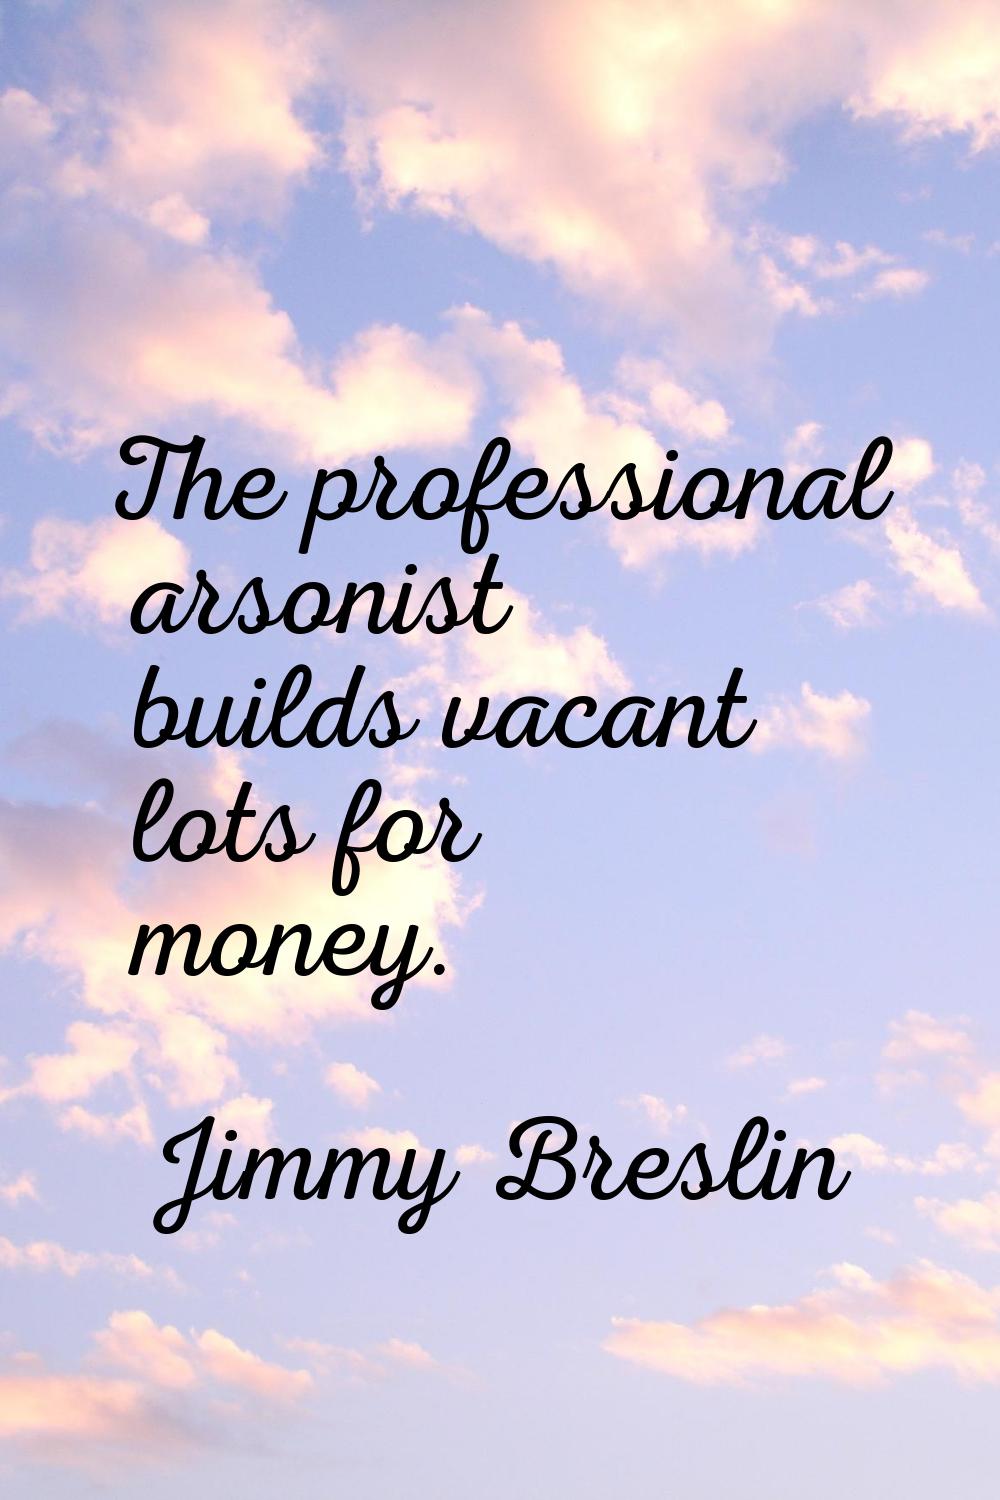 The professional arsonist builds vacant lots for money.